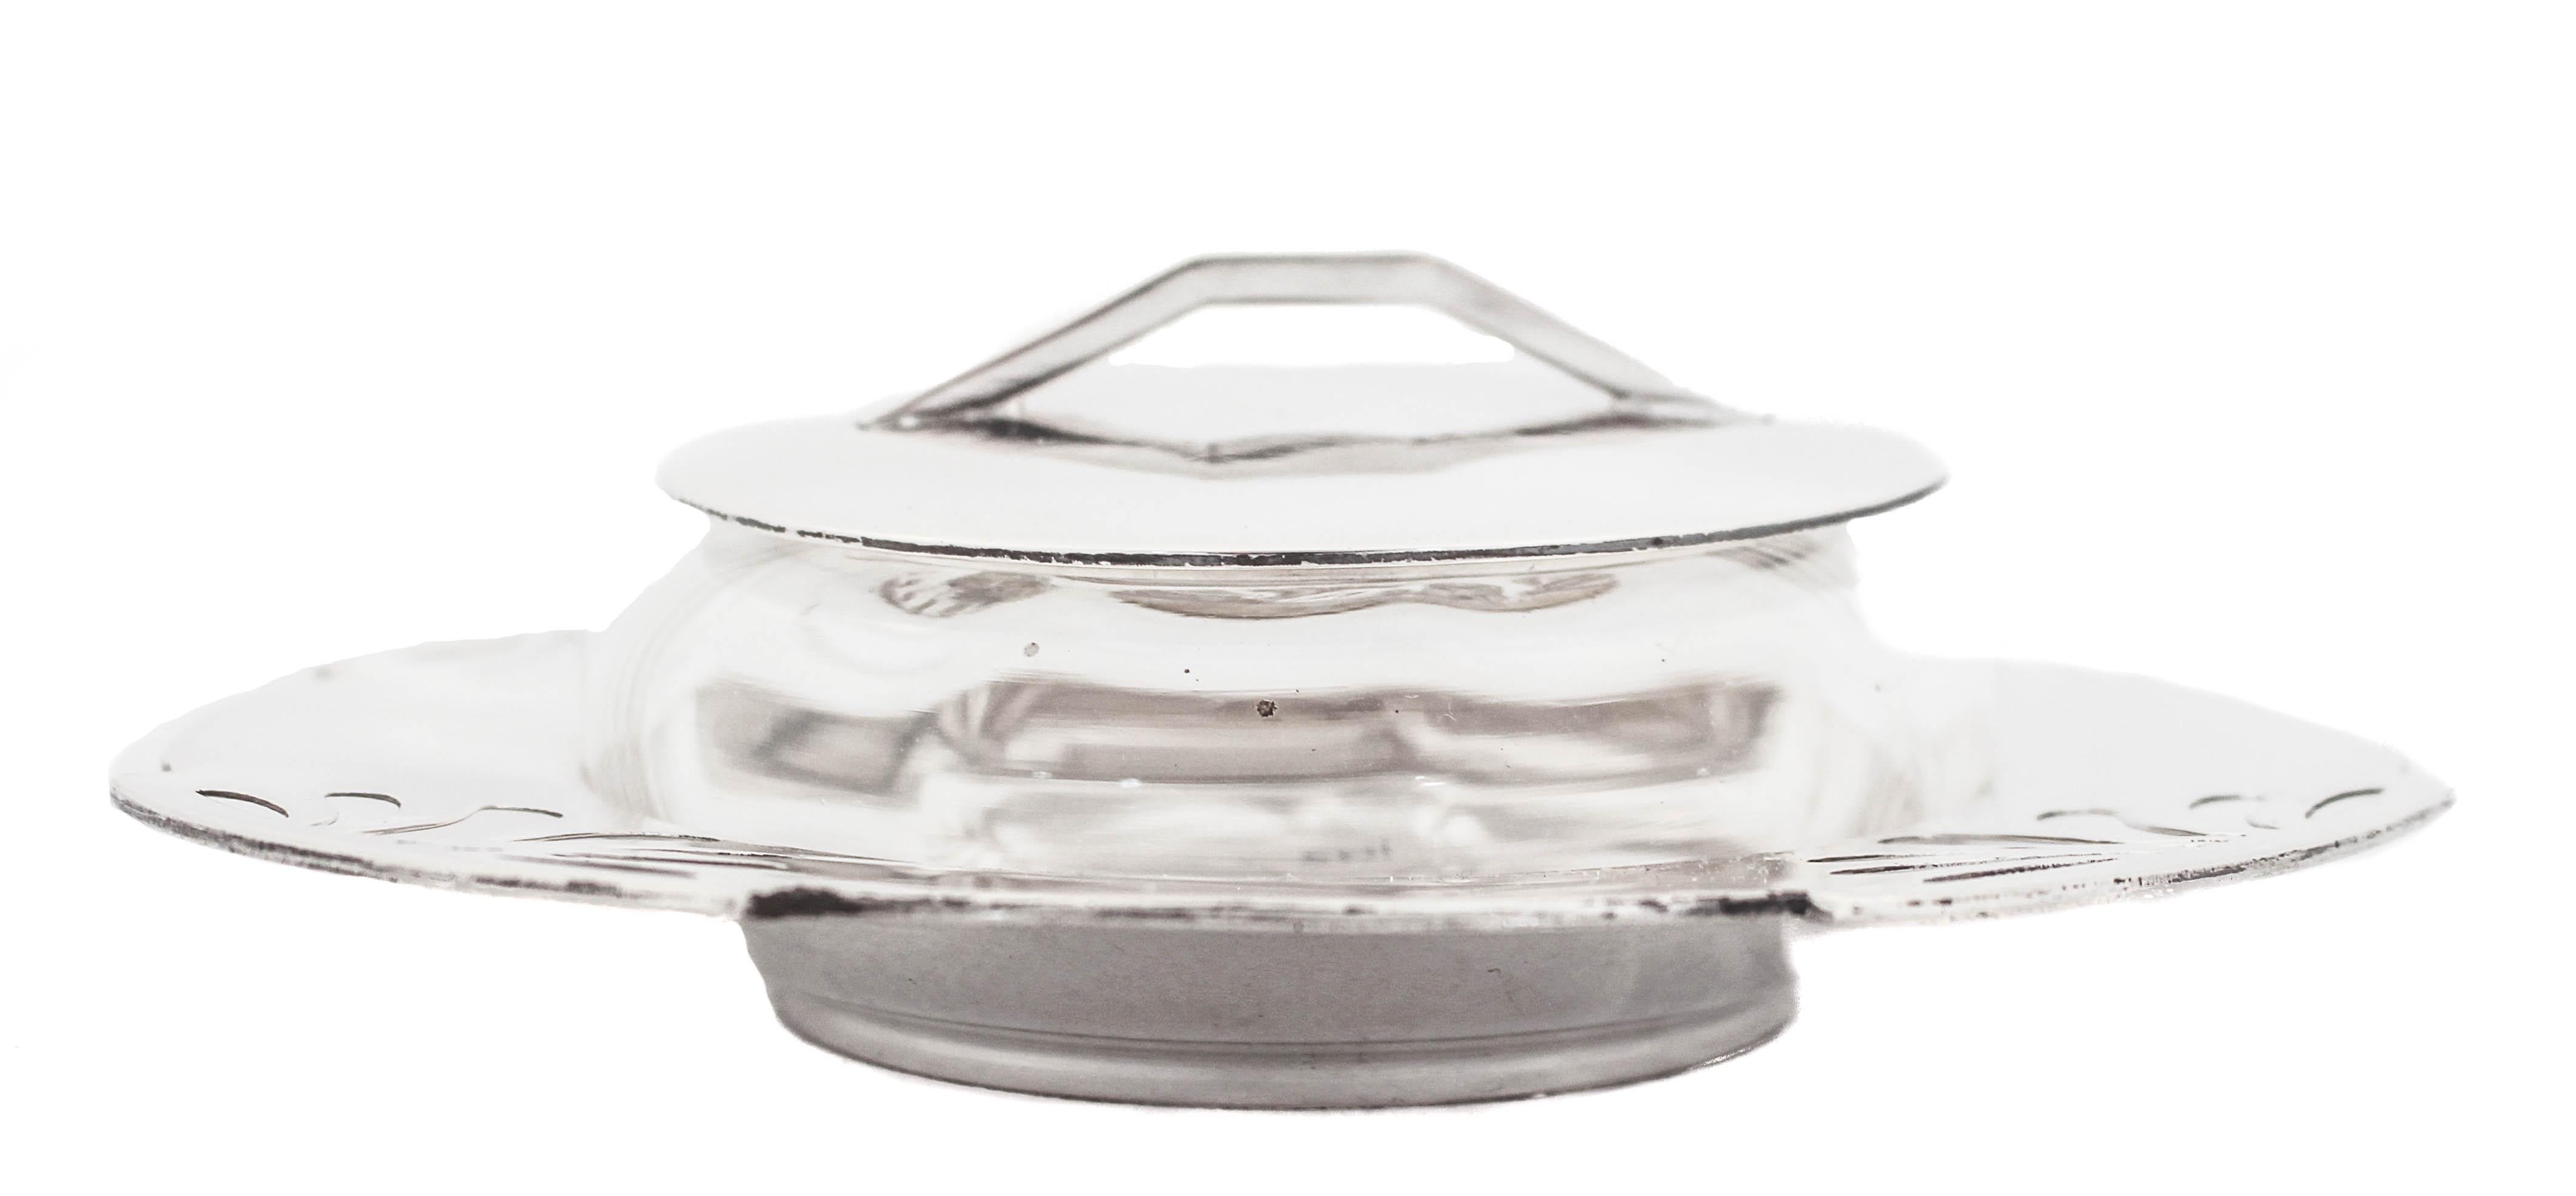 Being offered is a rare sterling silver caviar dish with a glass bowl with a silver cover.  The dish designed in the Bauhaus style with its cutout design and the unusual handle on the cover.  The most important influence on Bauhaus was modernism as